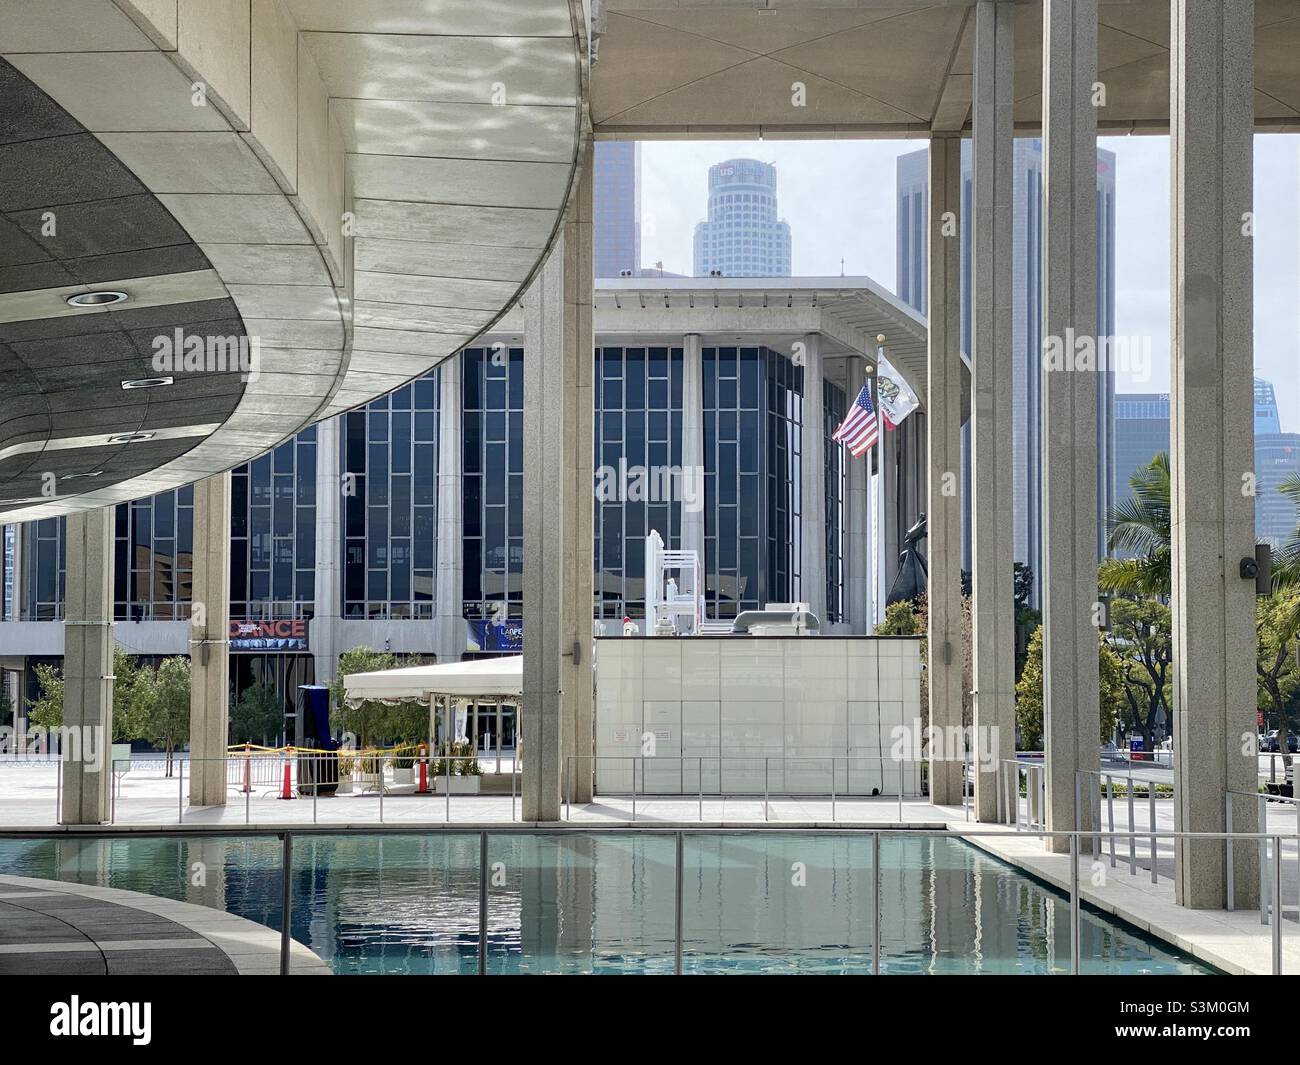 LOS ANGELES, CA, FEB 2021: Dorothy Chandler Pavilion, home of the LA Opera, seen from water feature outside the Mark Taper Forum at the Music Center in Downtown Stock Photo